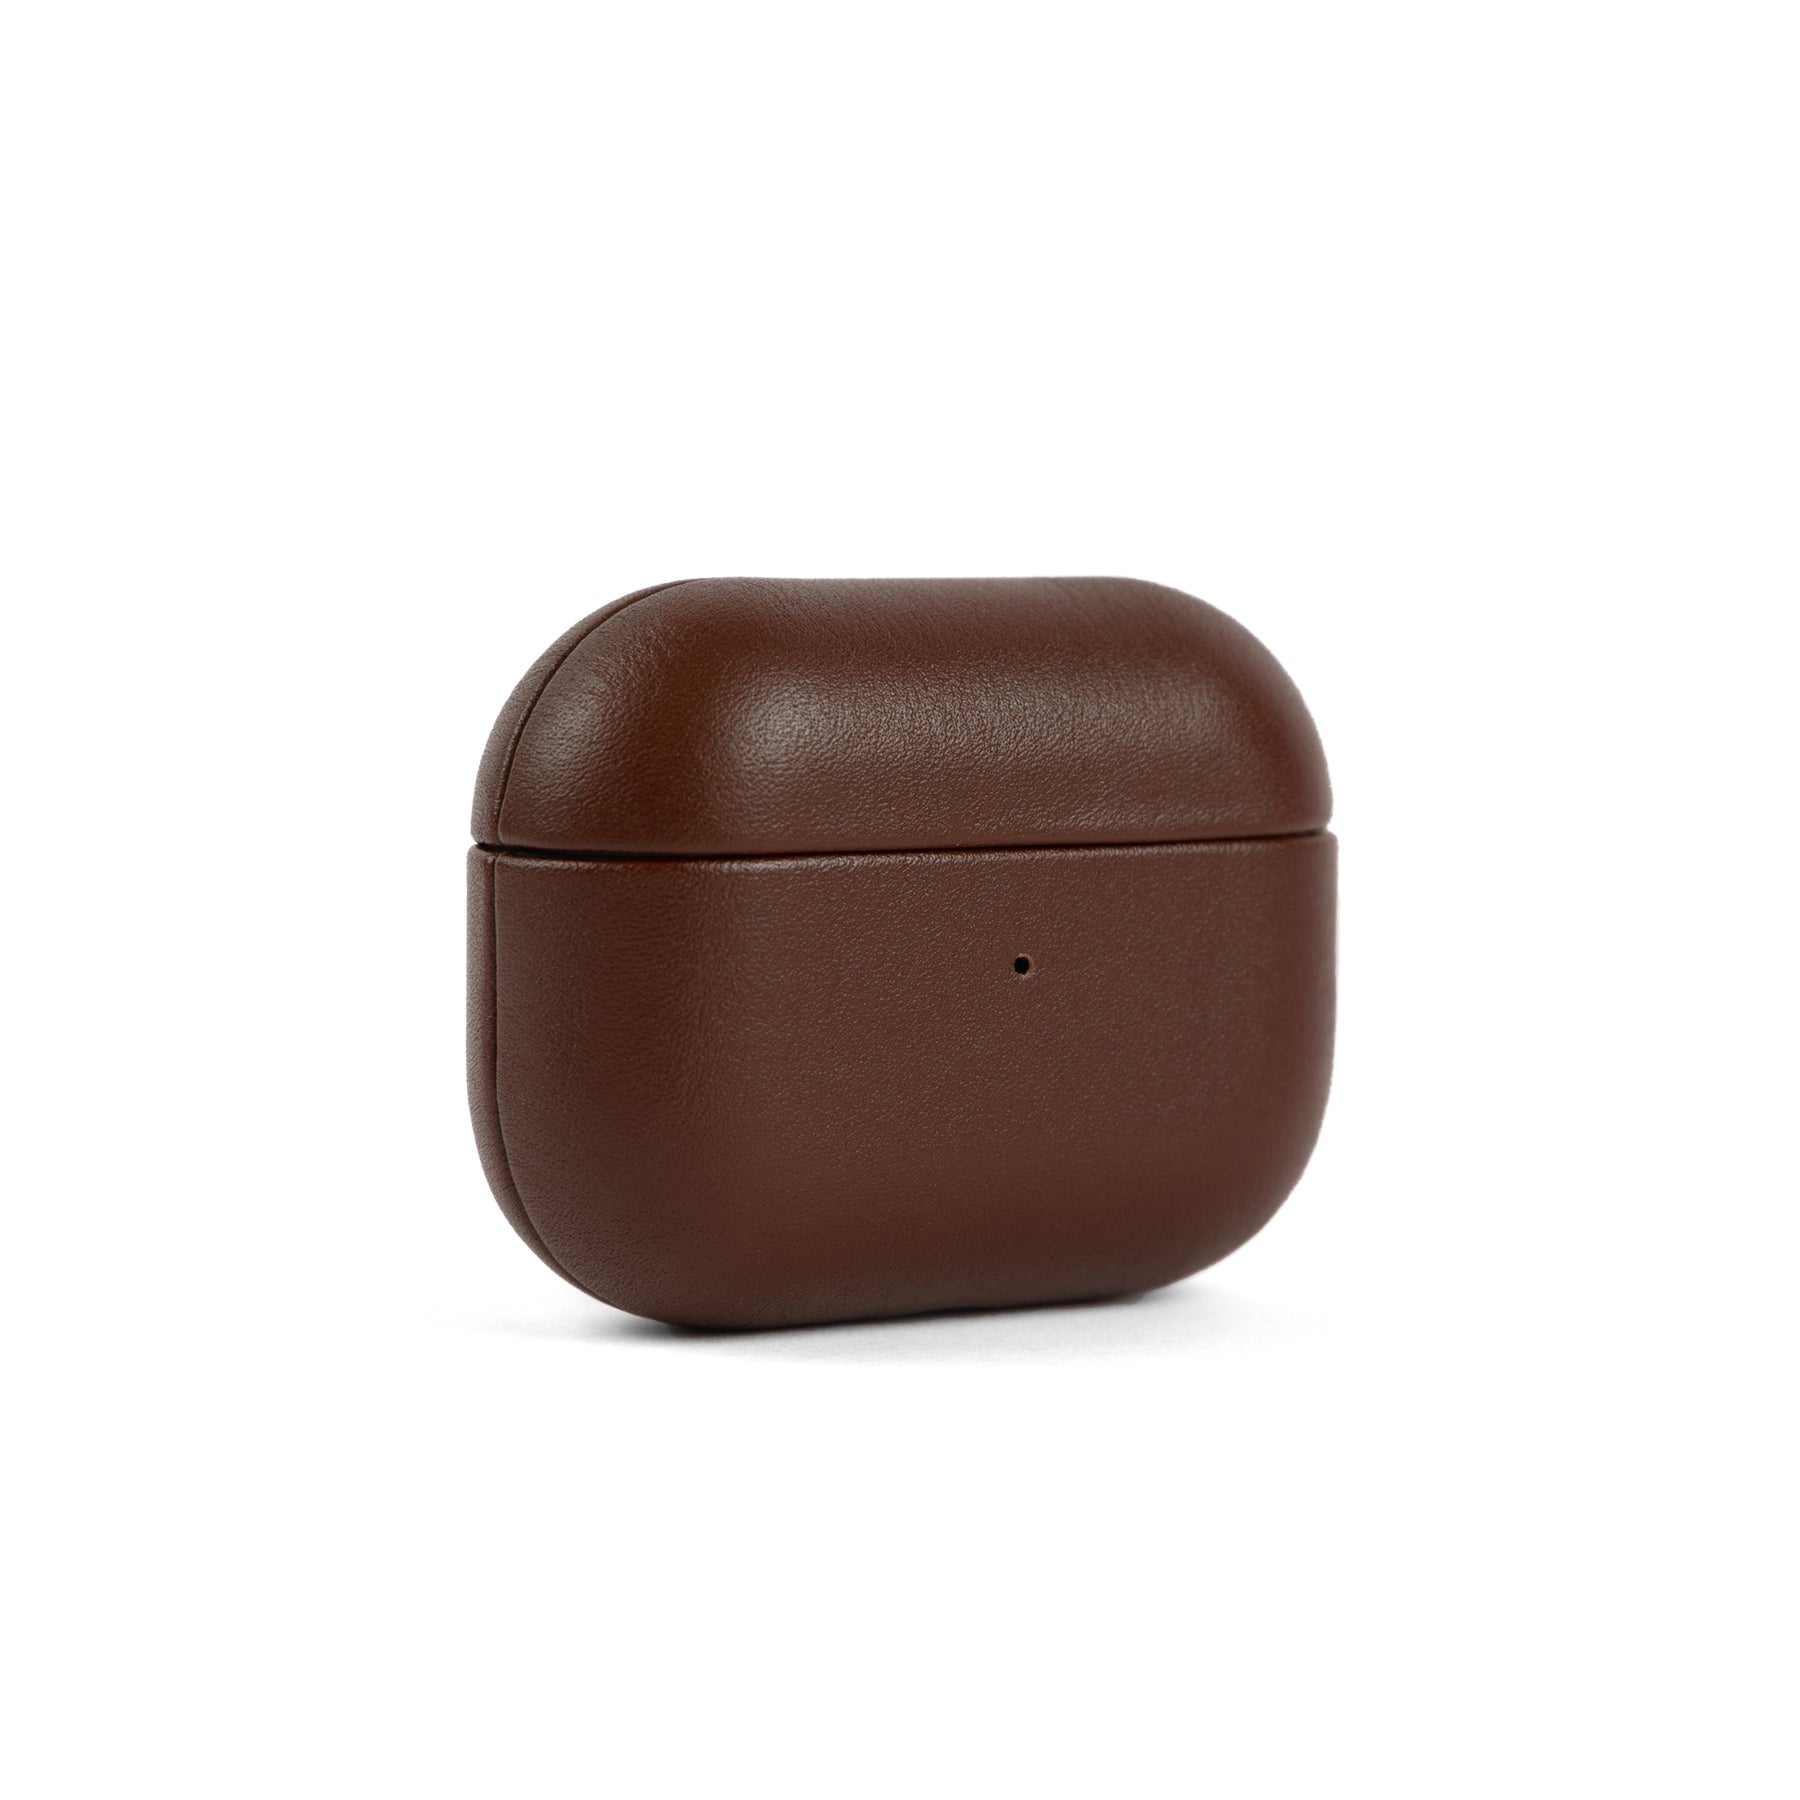 AirPods Case Paris Burgundy  SURITT Leather Cases for AirPods